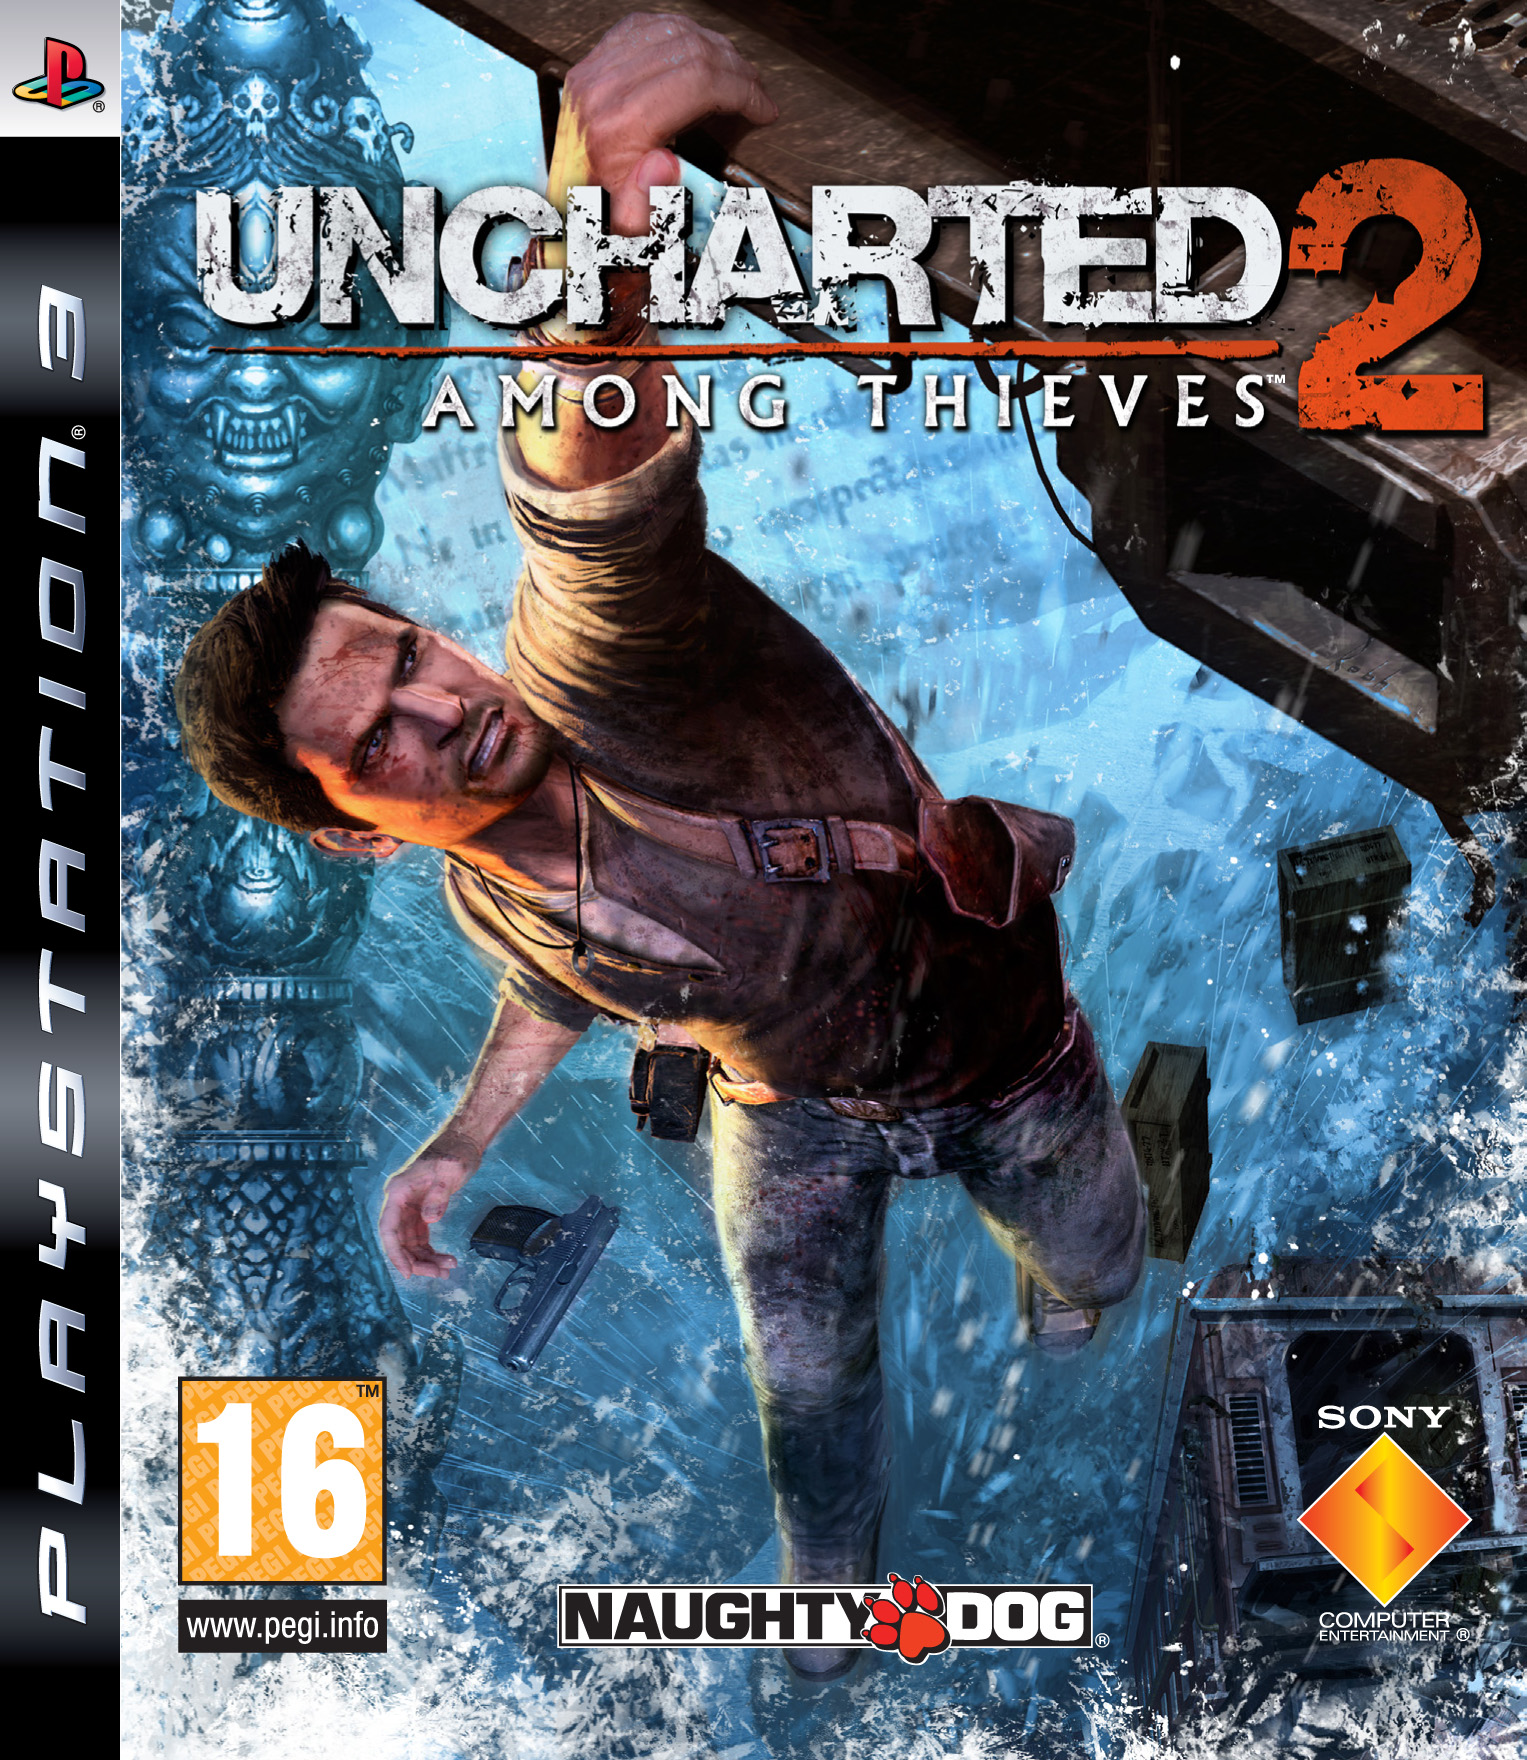 ps4 uncharted 1